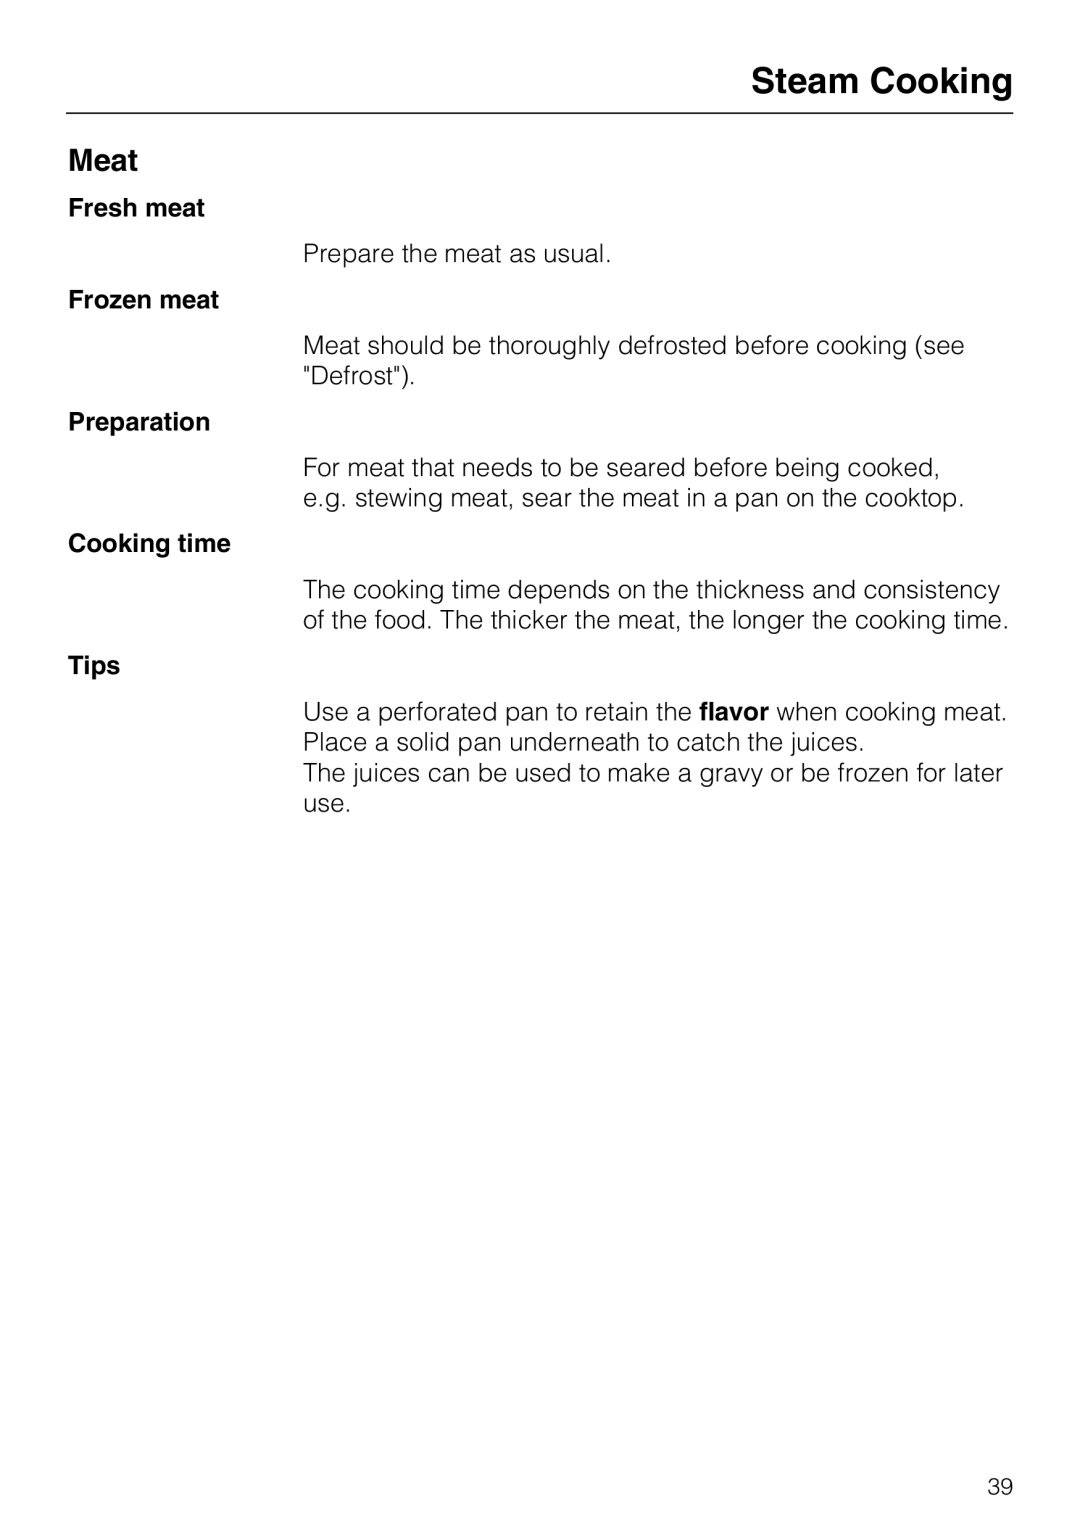 Miele 09 800 830 installation instructions Meat, Steam Cooking, Fresh meat, Frozen meat, Preparation, Cooking time, Tips 